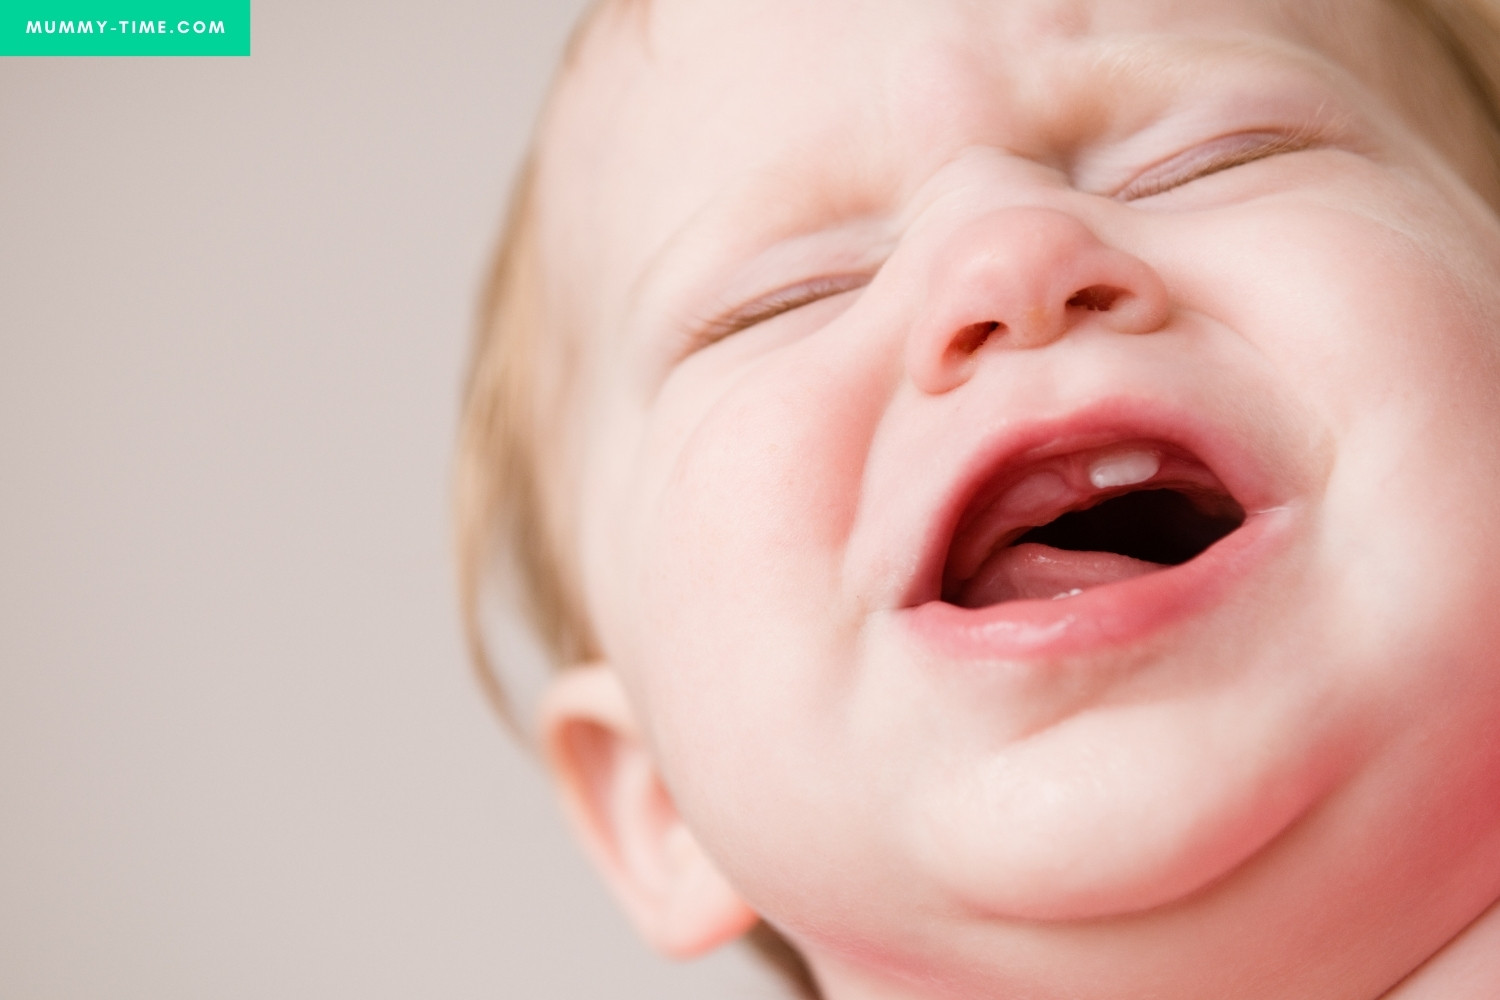 Can Teething Cause Ear Infections In Babies?